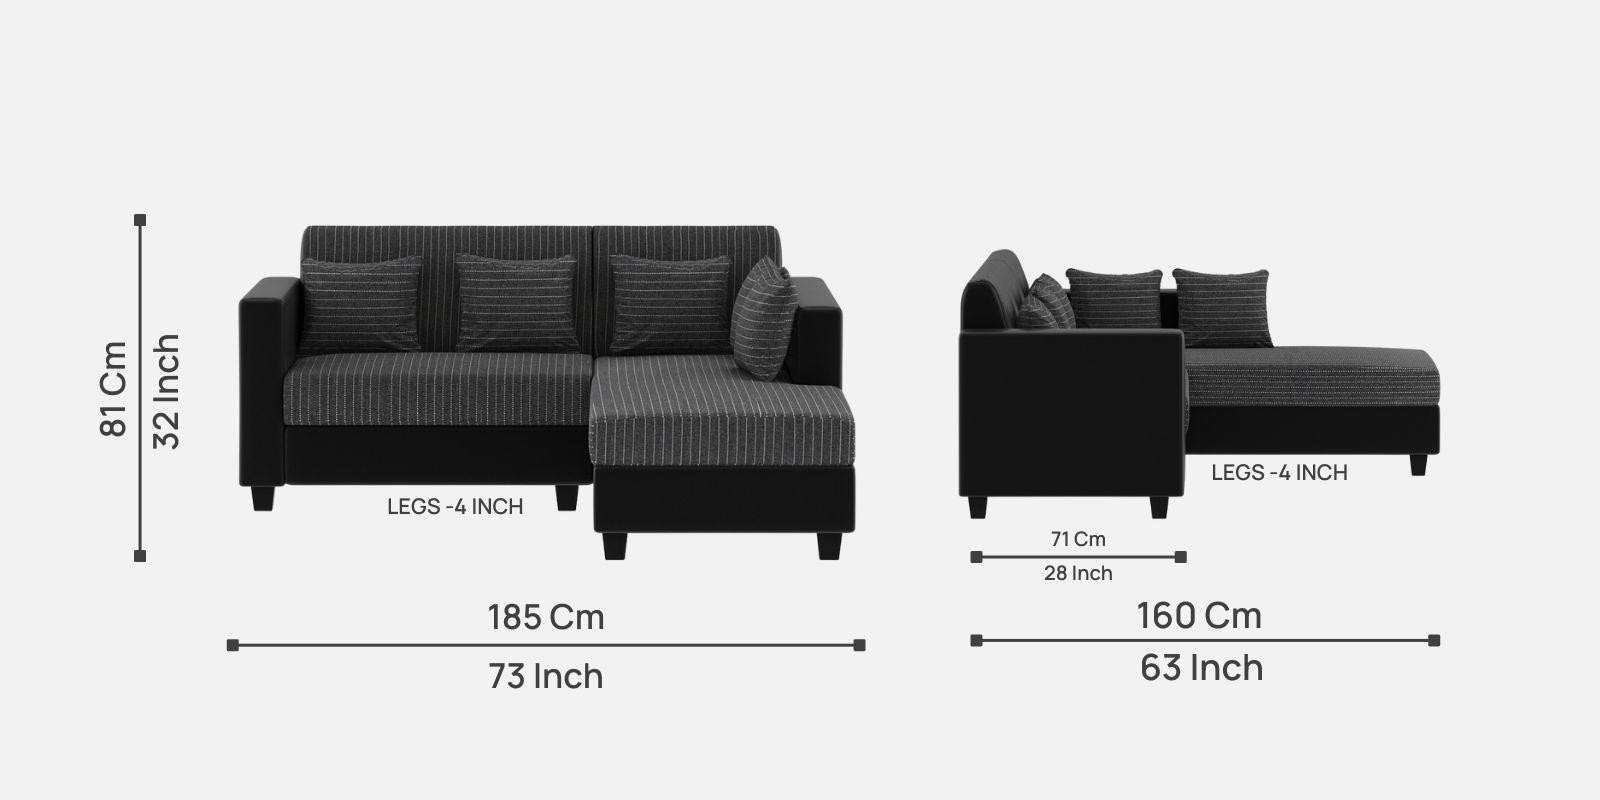 Baley Fabric RHS Sectional Sofa (2 + Lounger) In Lama Black Colour